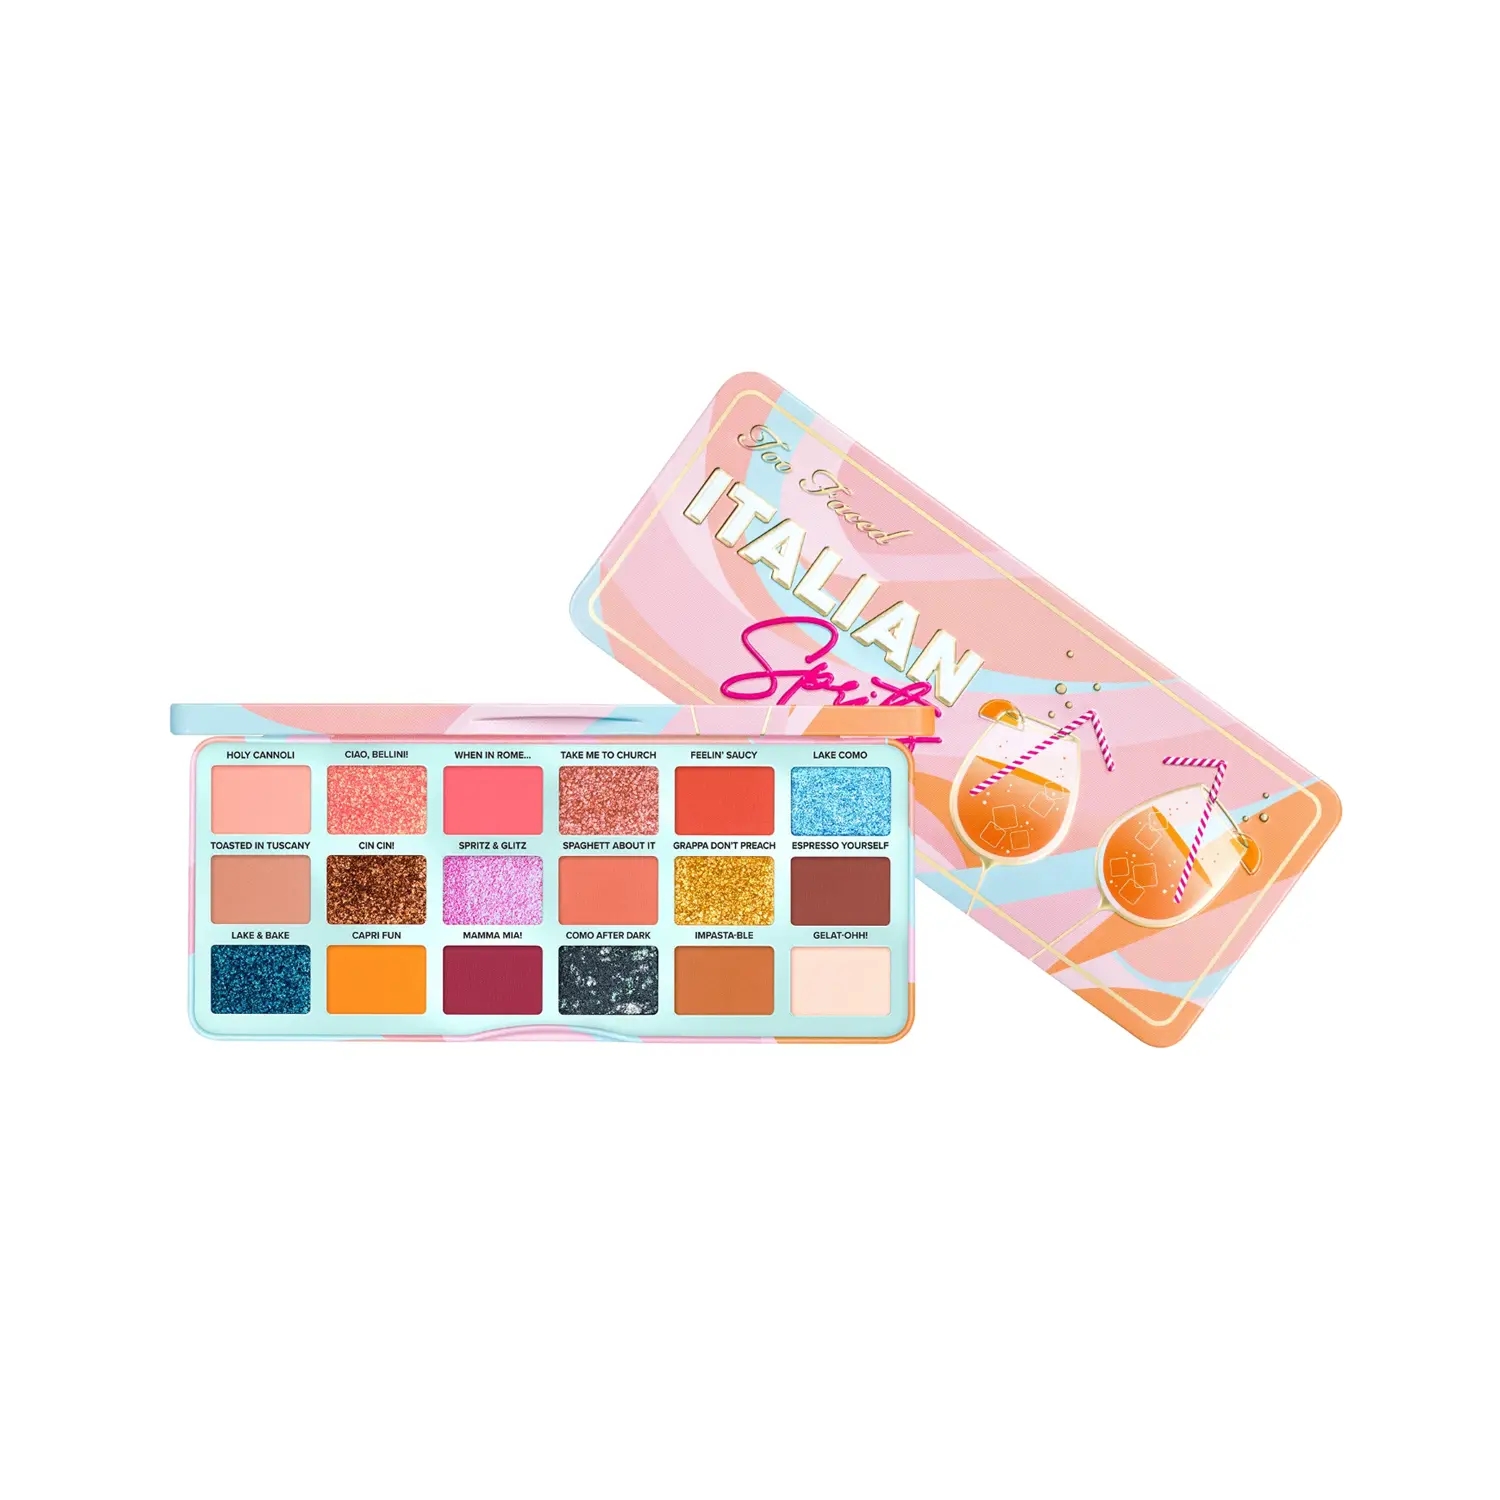 Too Faced | Too Faced Italian Spritz eyeshadow Palette - Multi-Color (18g)